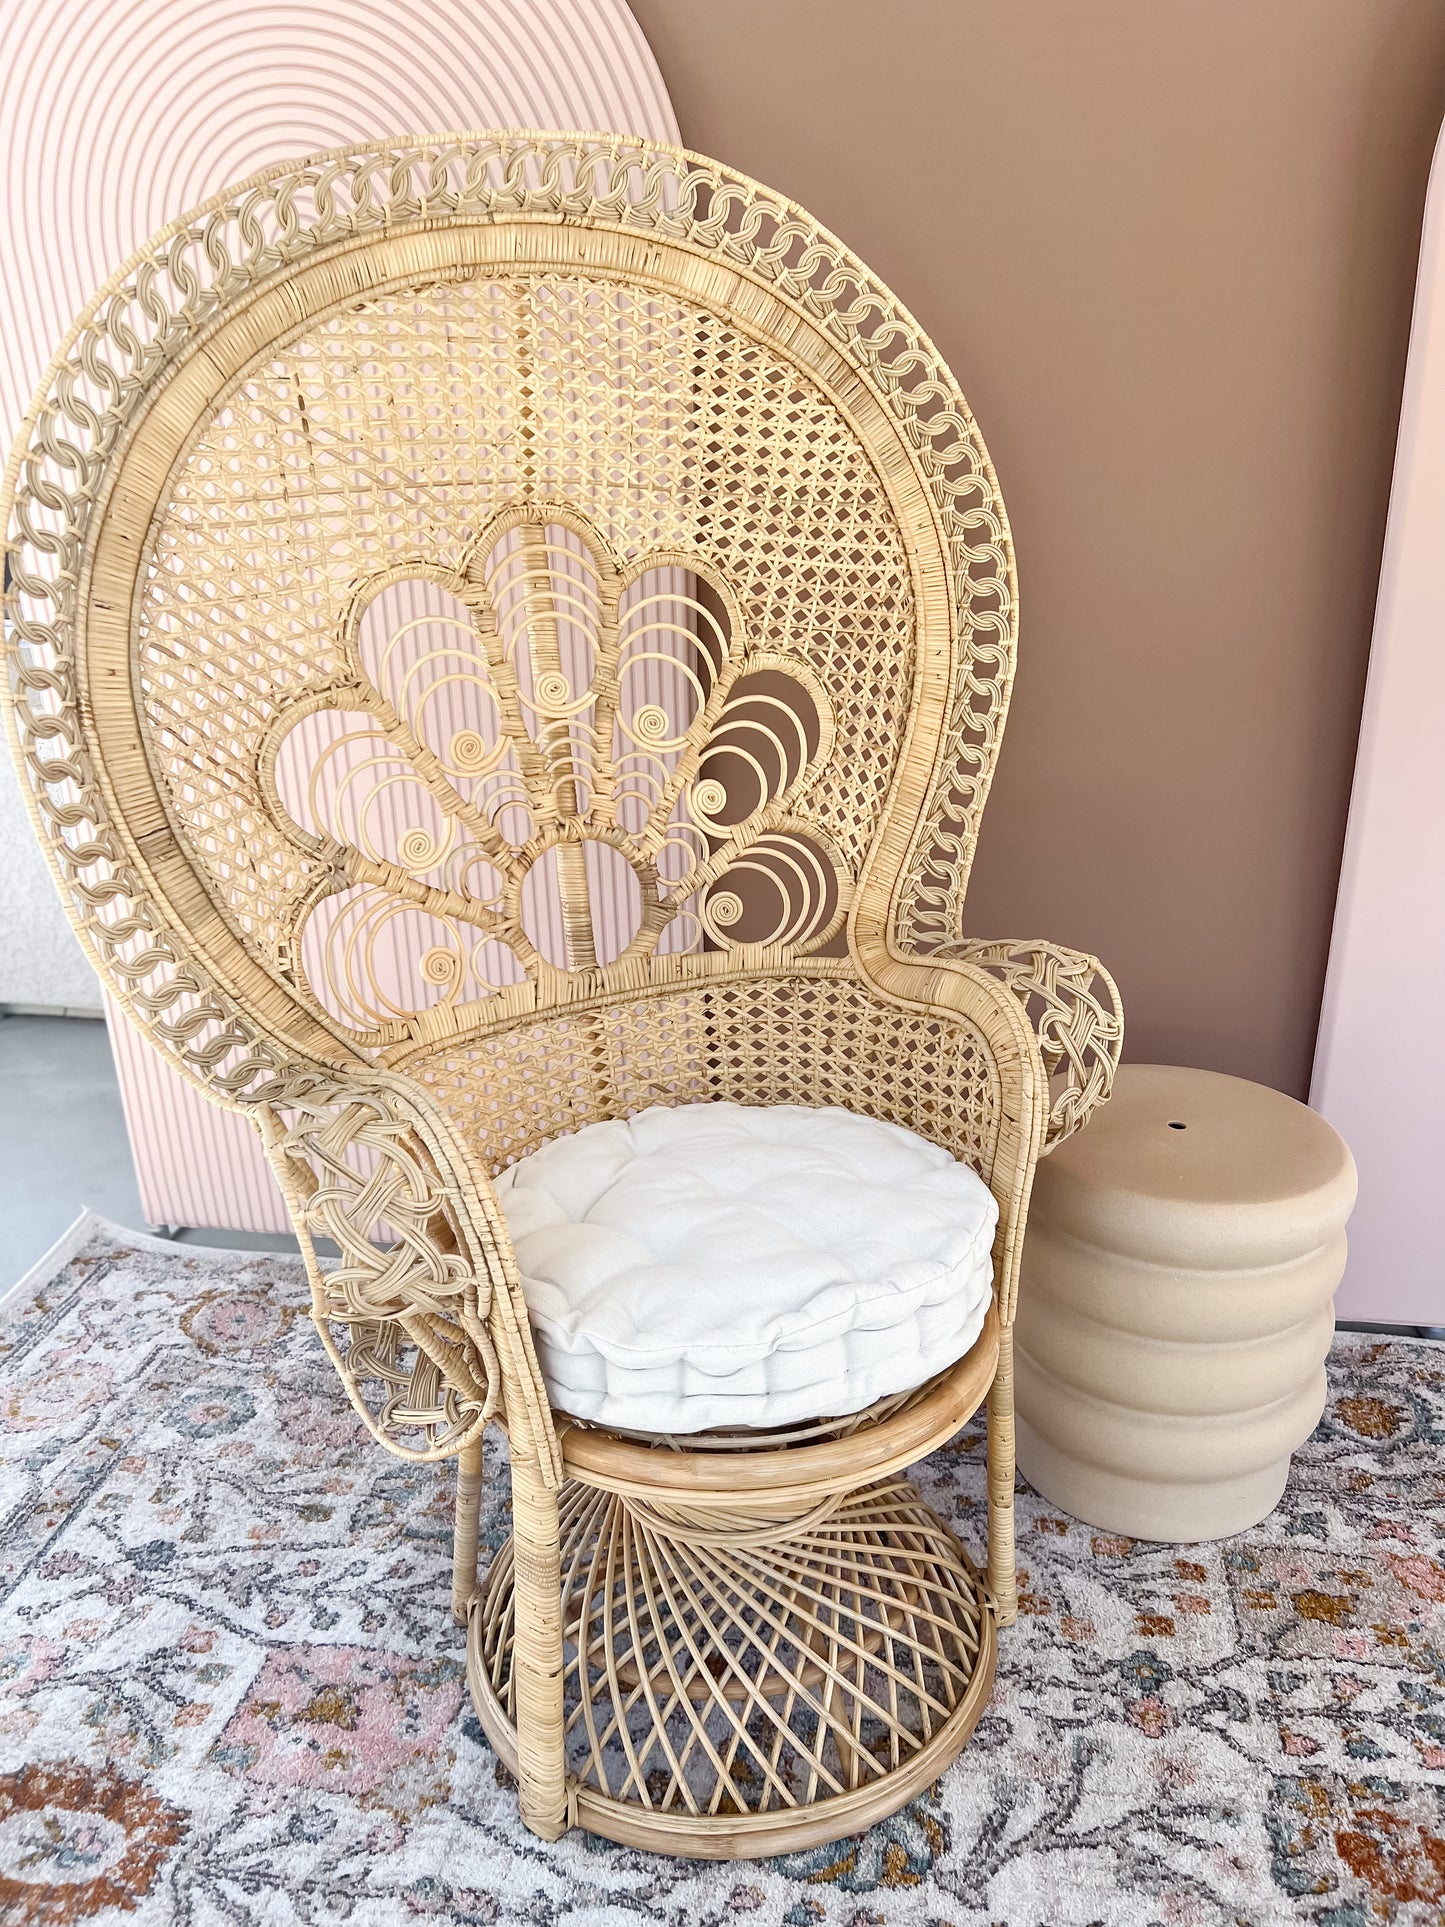 Boho Set Up with Peacock or Rattan Chair